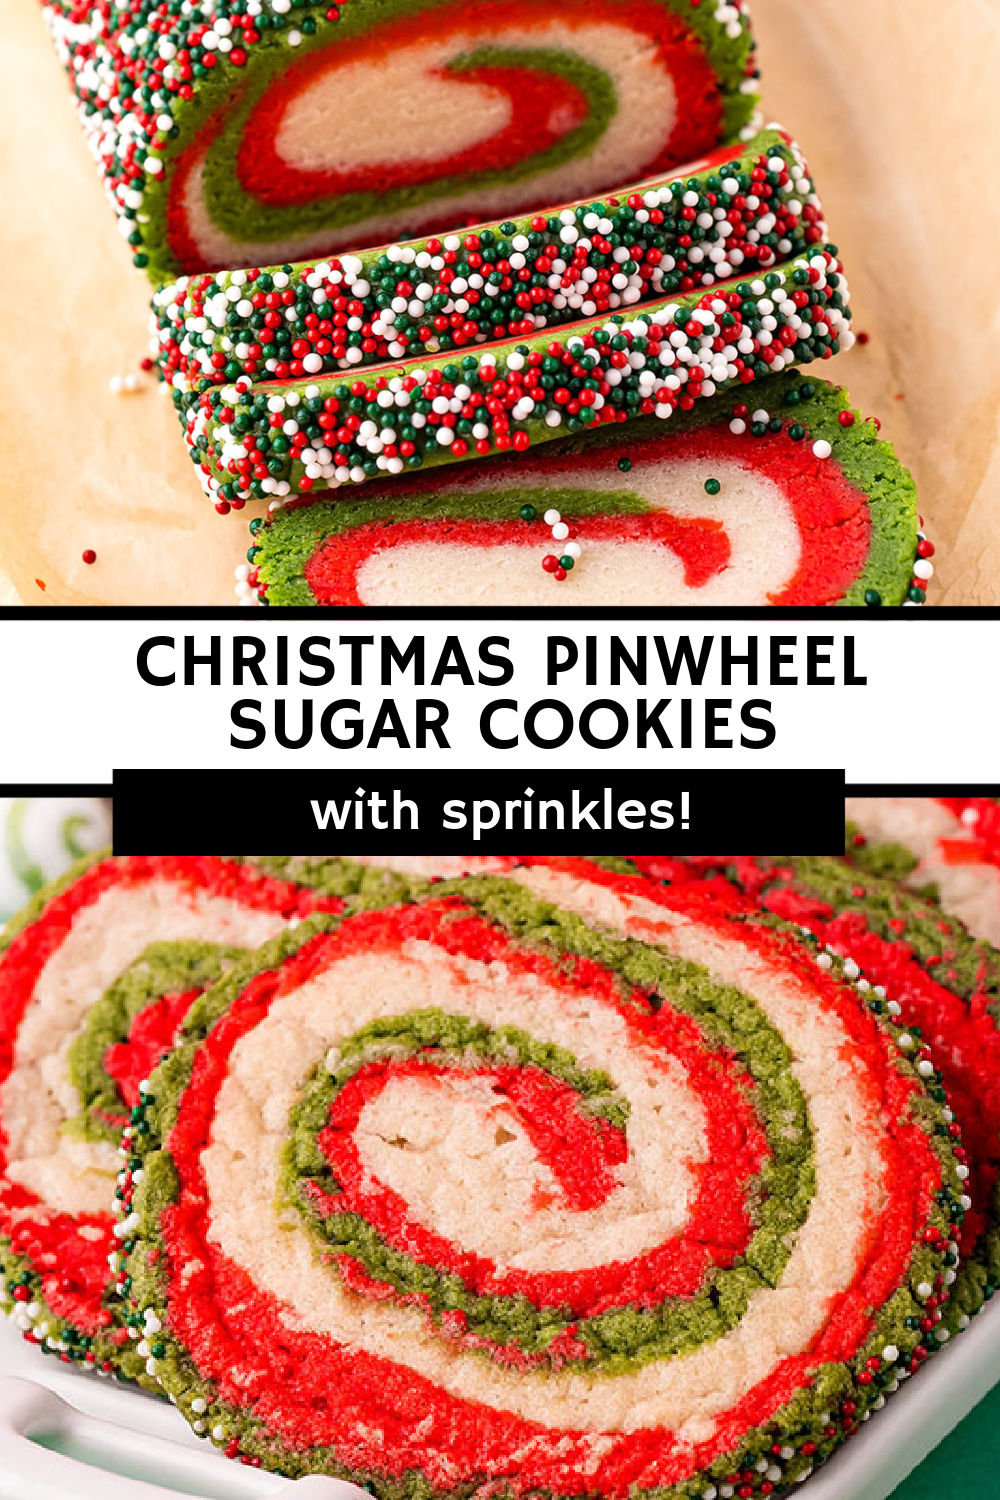 These pinwheel cookies are perfect for the Christmas season! Store-bought sugar cookie dough is transformed into a vibrant red, green, and white swirl cookie with a crunchy sprinkle edge - it doesn't get any more festive than this! | www.persnicketyplates.com